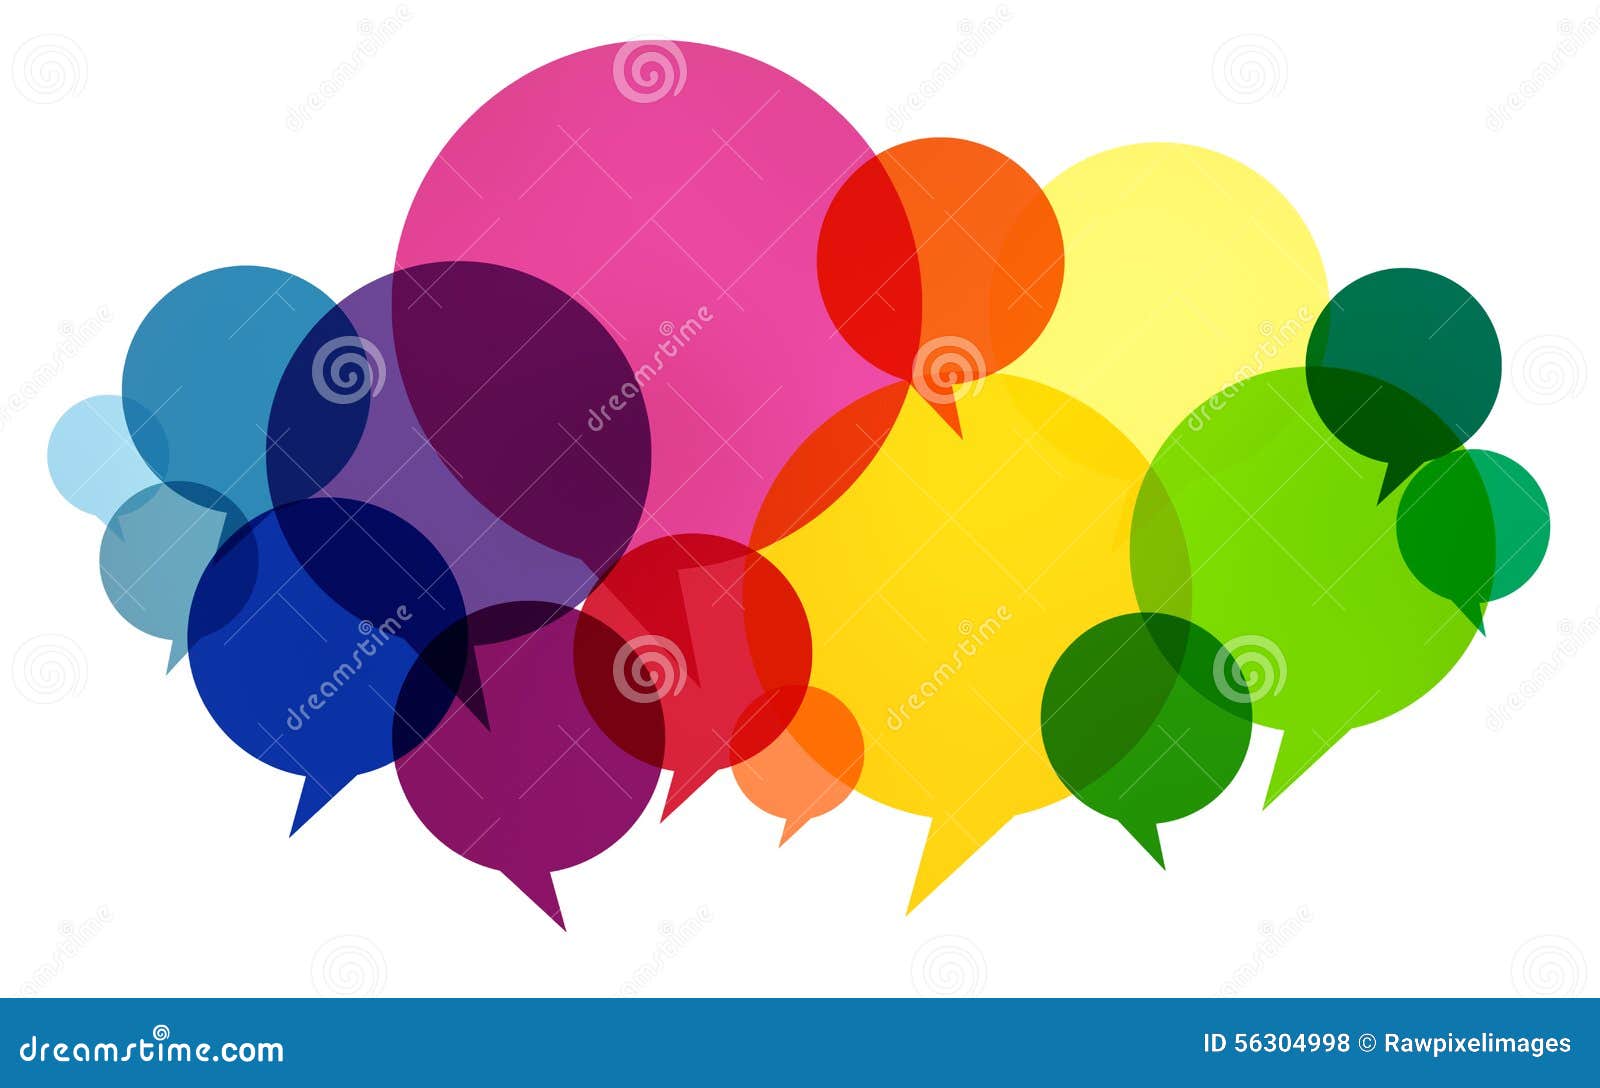 speech bubbles colorful communication thoughts talking concept